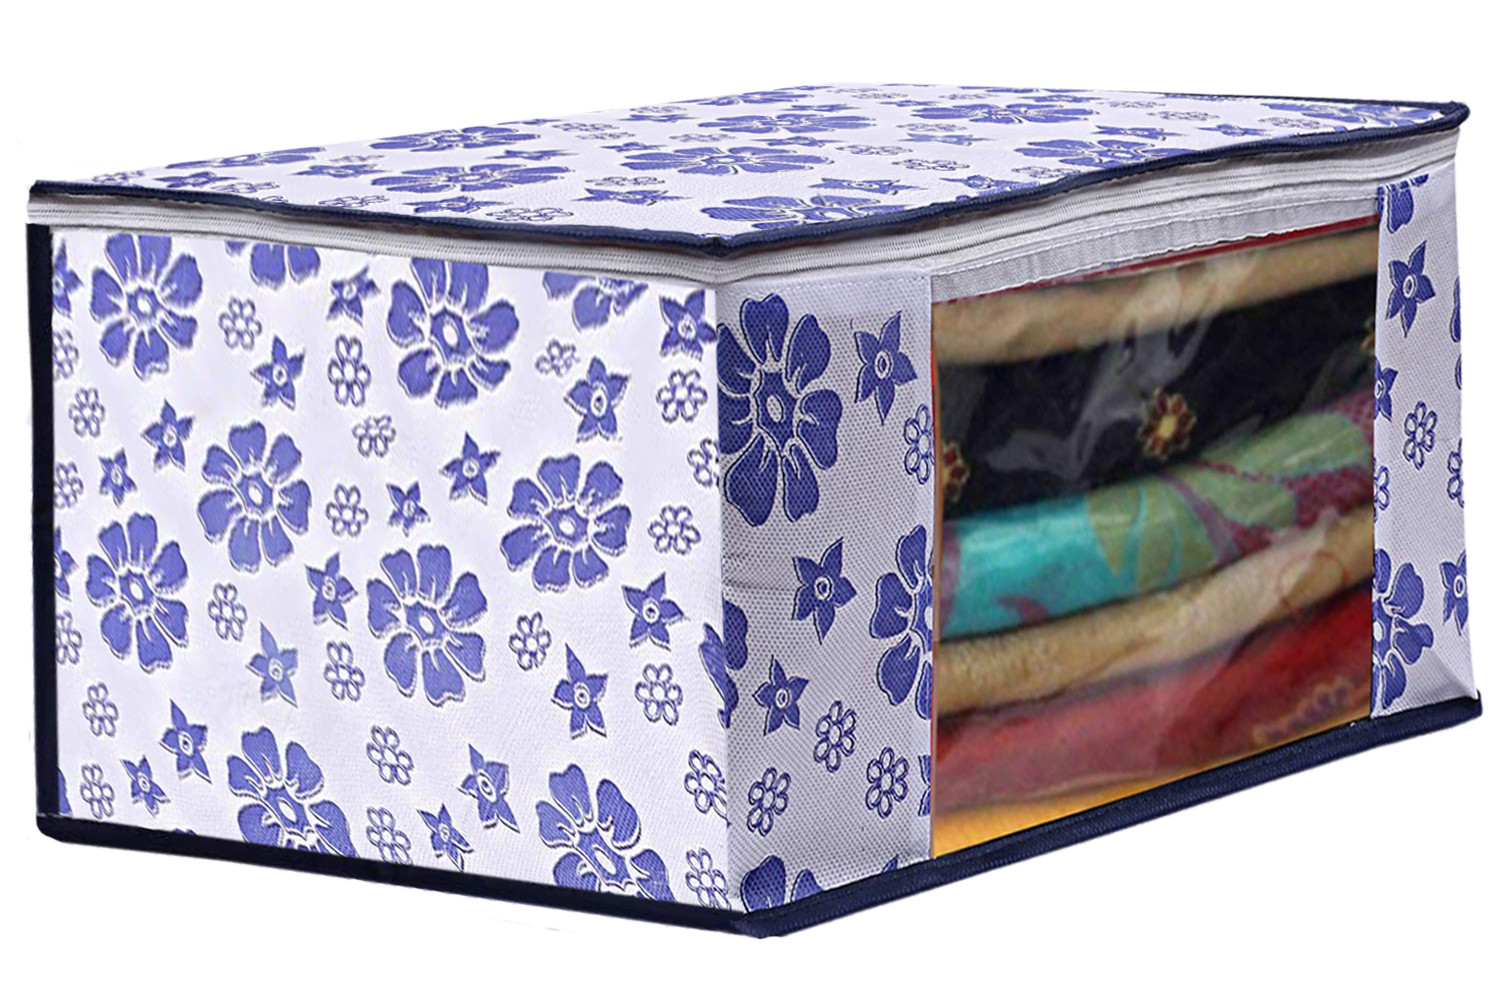 Kuber Industries Flower DesignNon Woven Saree Cover And Underbed Storage Bag, Storage Organiser, Blanket Cover, Pink & Blue  -CTKTC42367